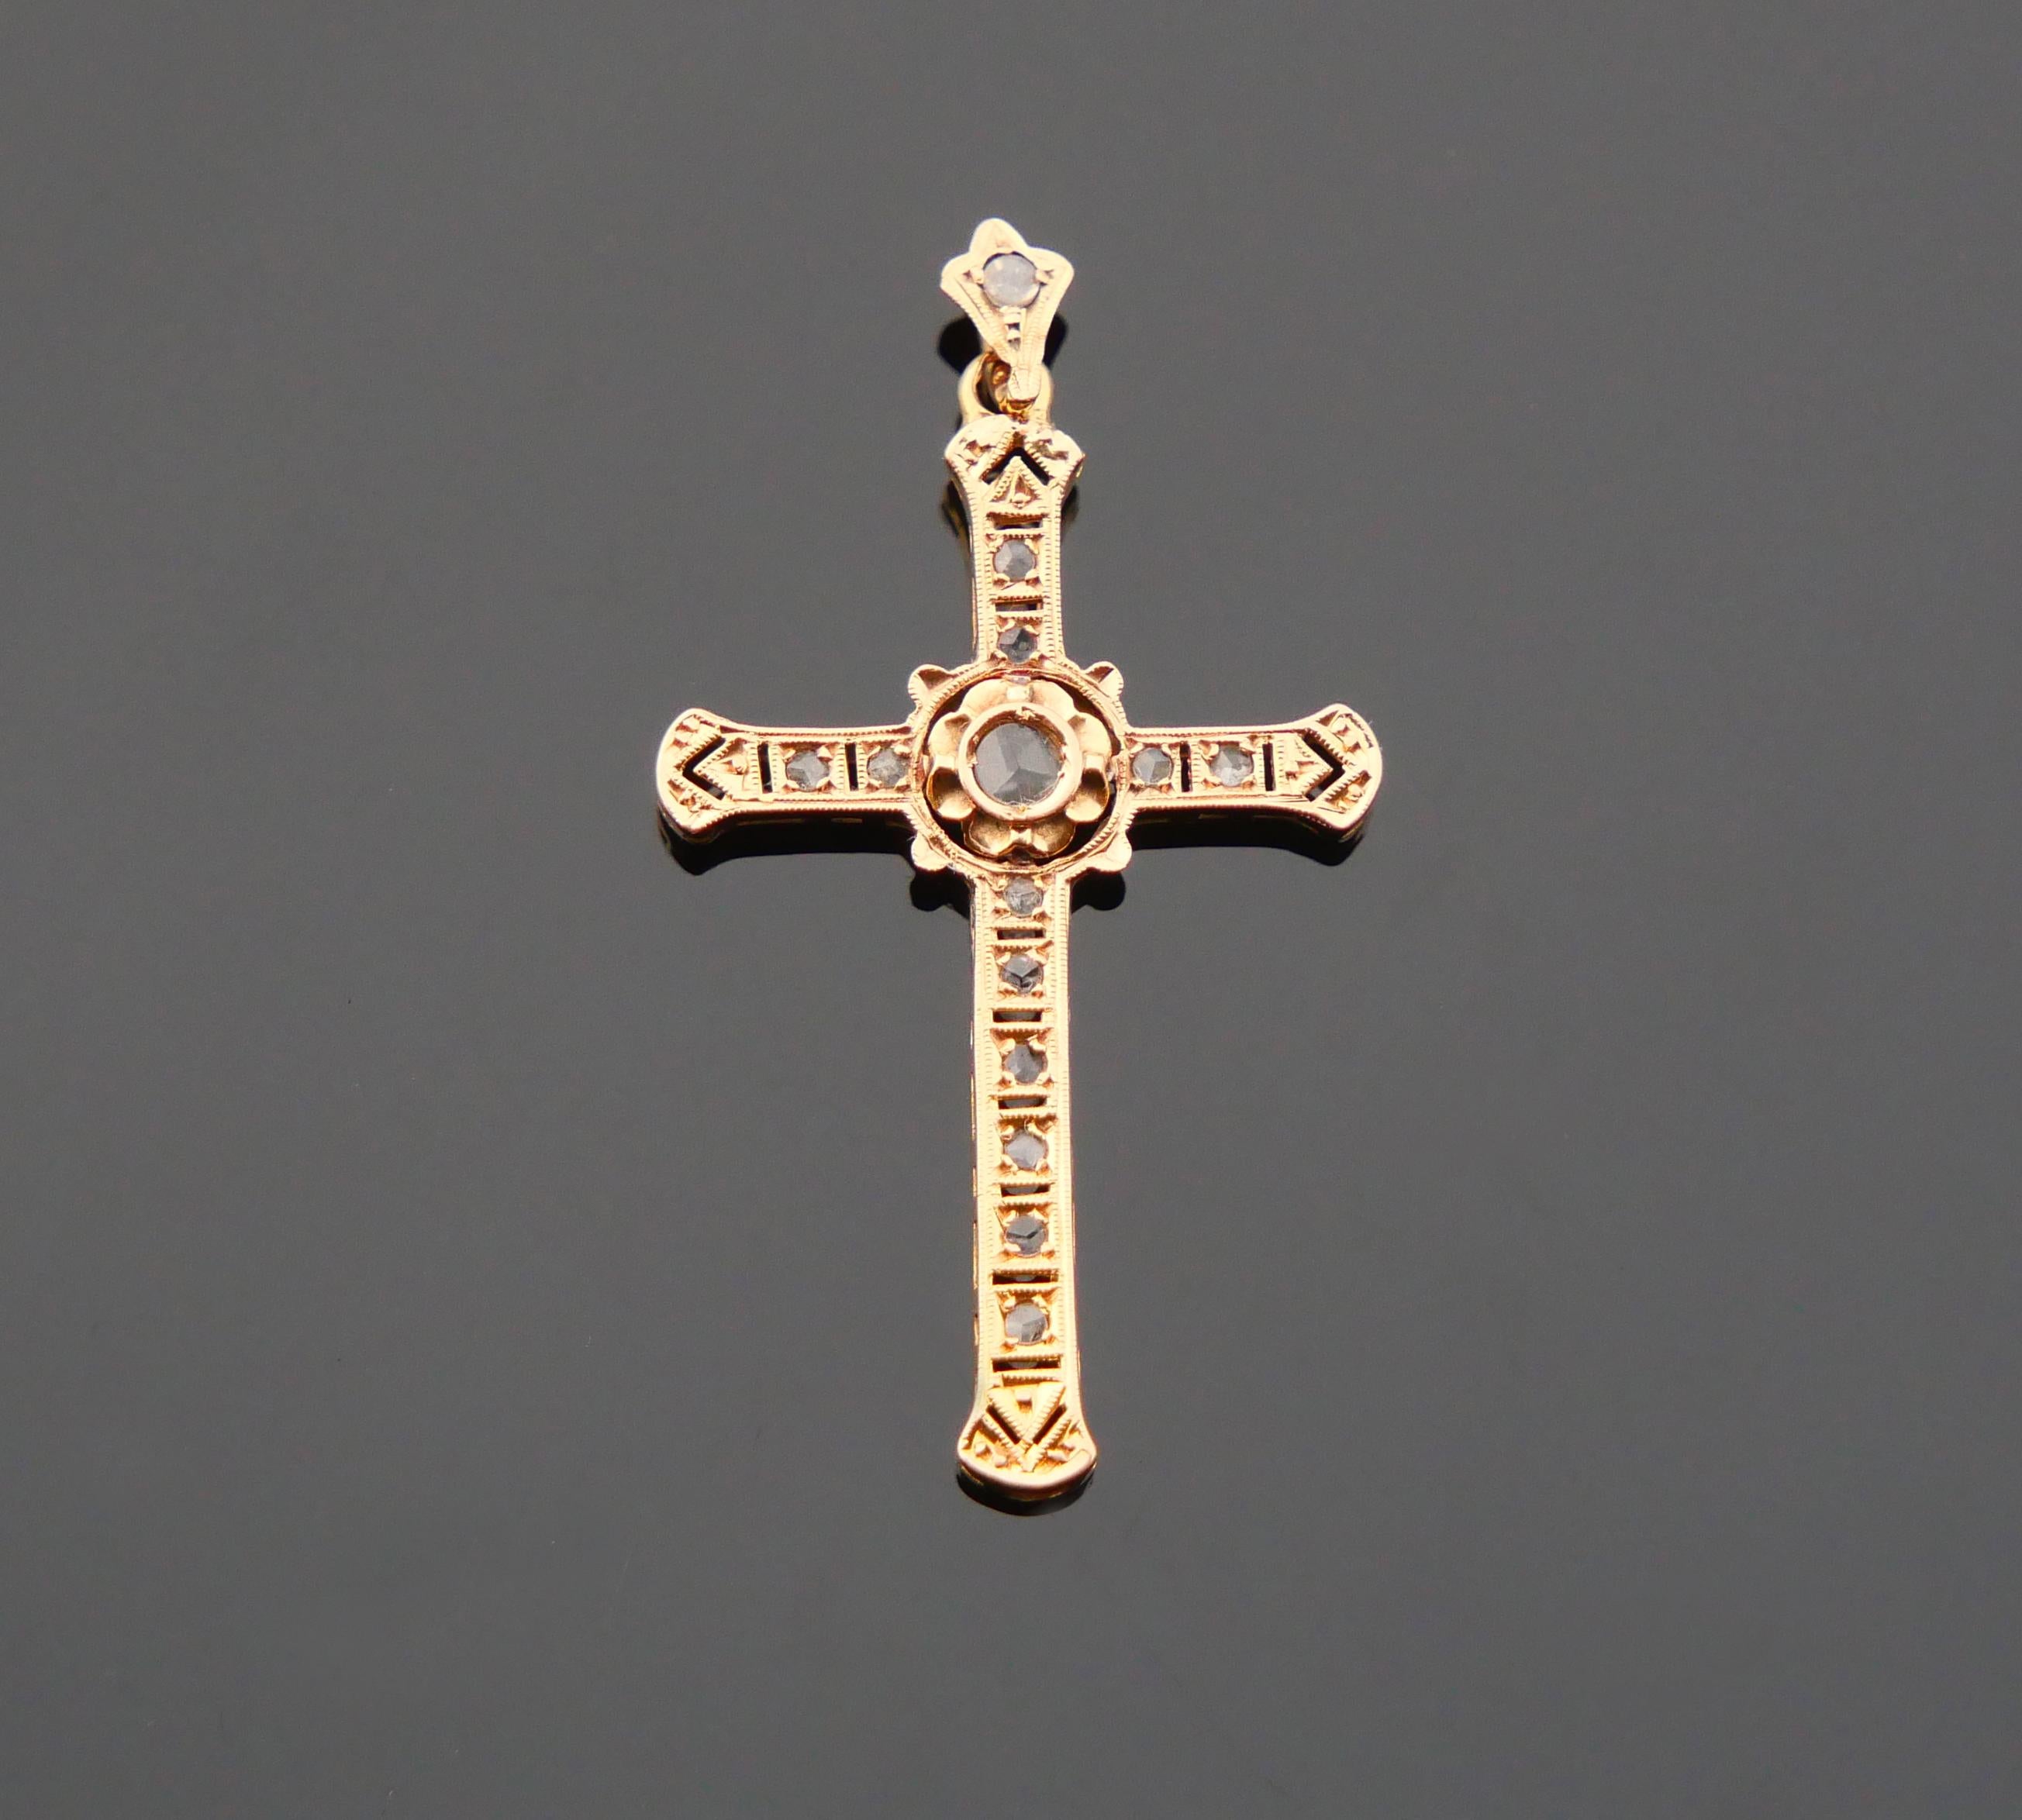 Antique ca. early XX cent. European openwork crucifix pendant skillfully set with 14 rose cut Diamonds / 3 facets on each stone.

Central Diamond Ø 3mm/ ca.0.14 ct + 12 Ø 1.25 mm / ca. 0.01ct each + one on the bail Ø 1.5 mm /ca.0.015ct.
Total weight